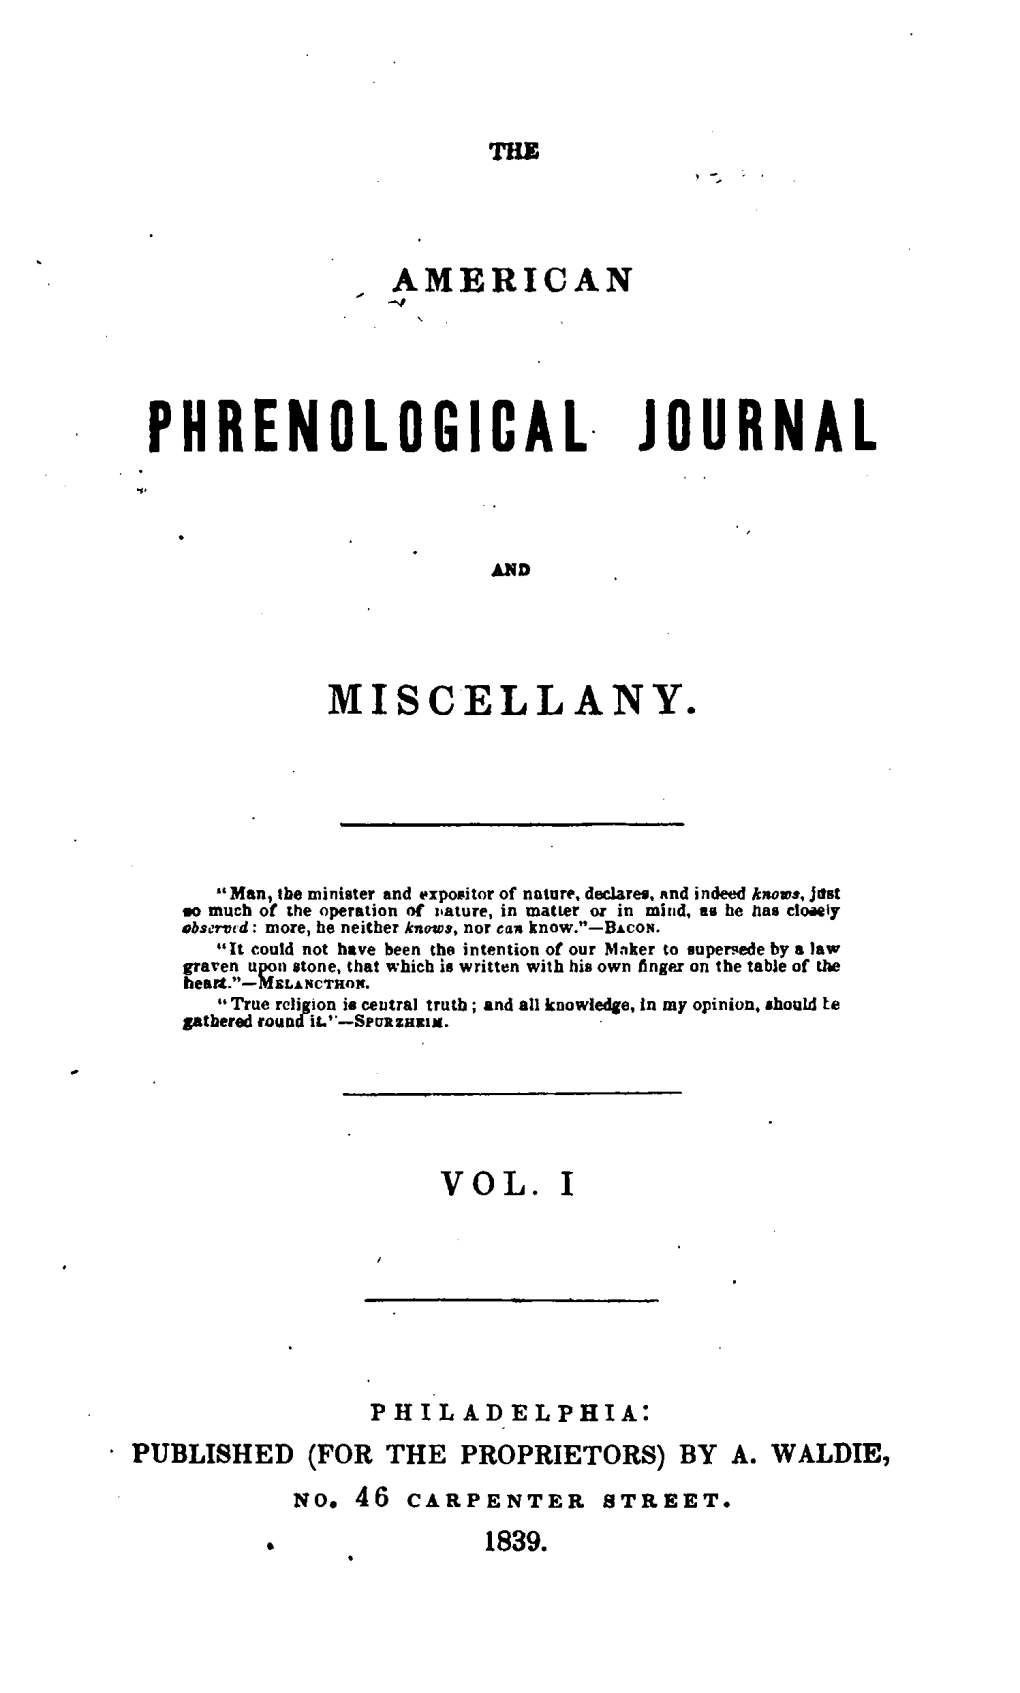 The American Phrenological Journal and Miscellany